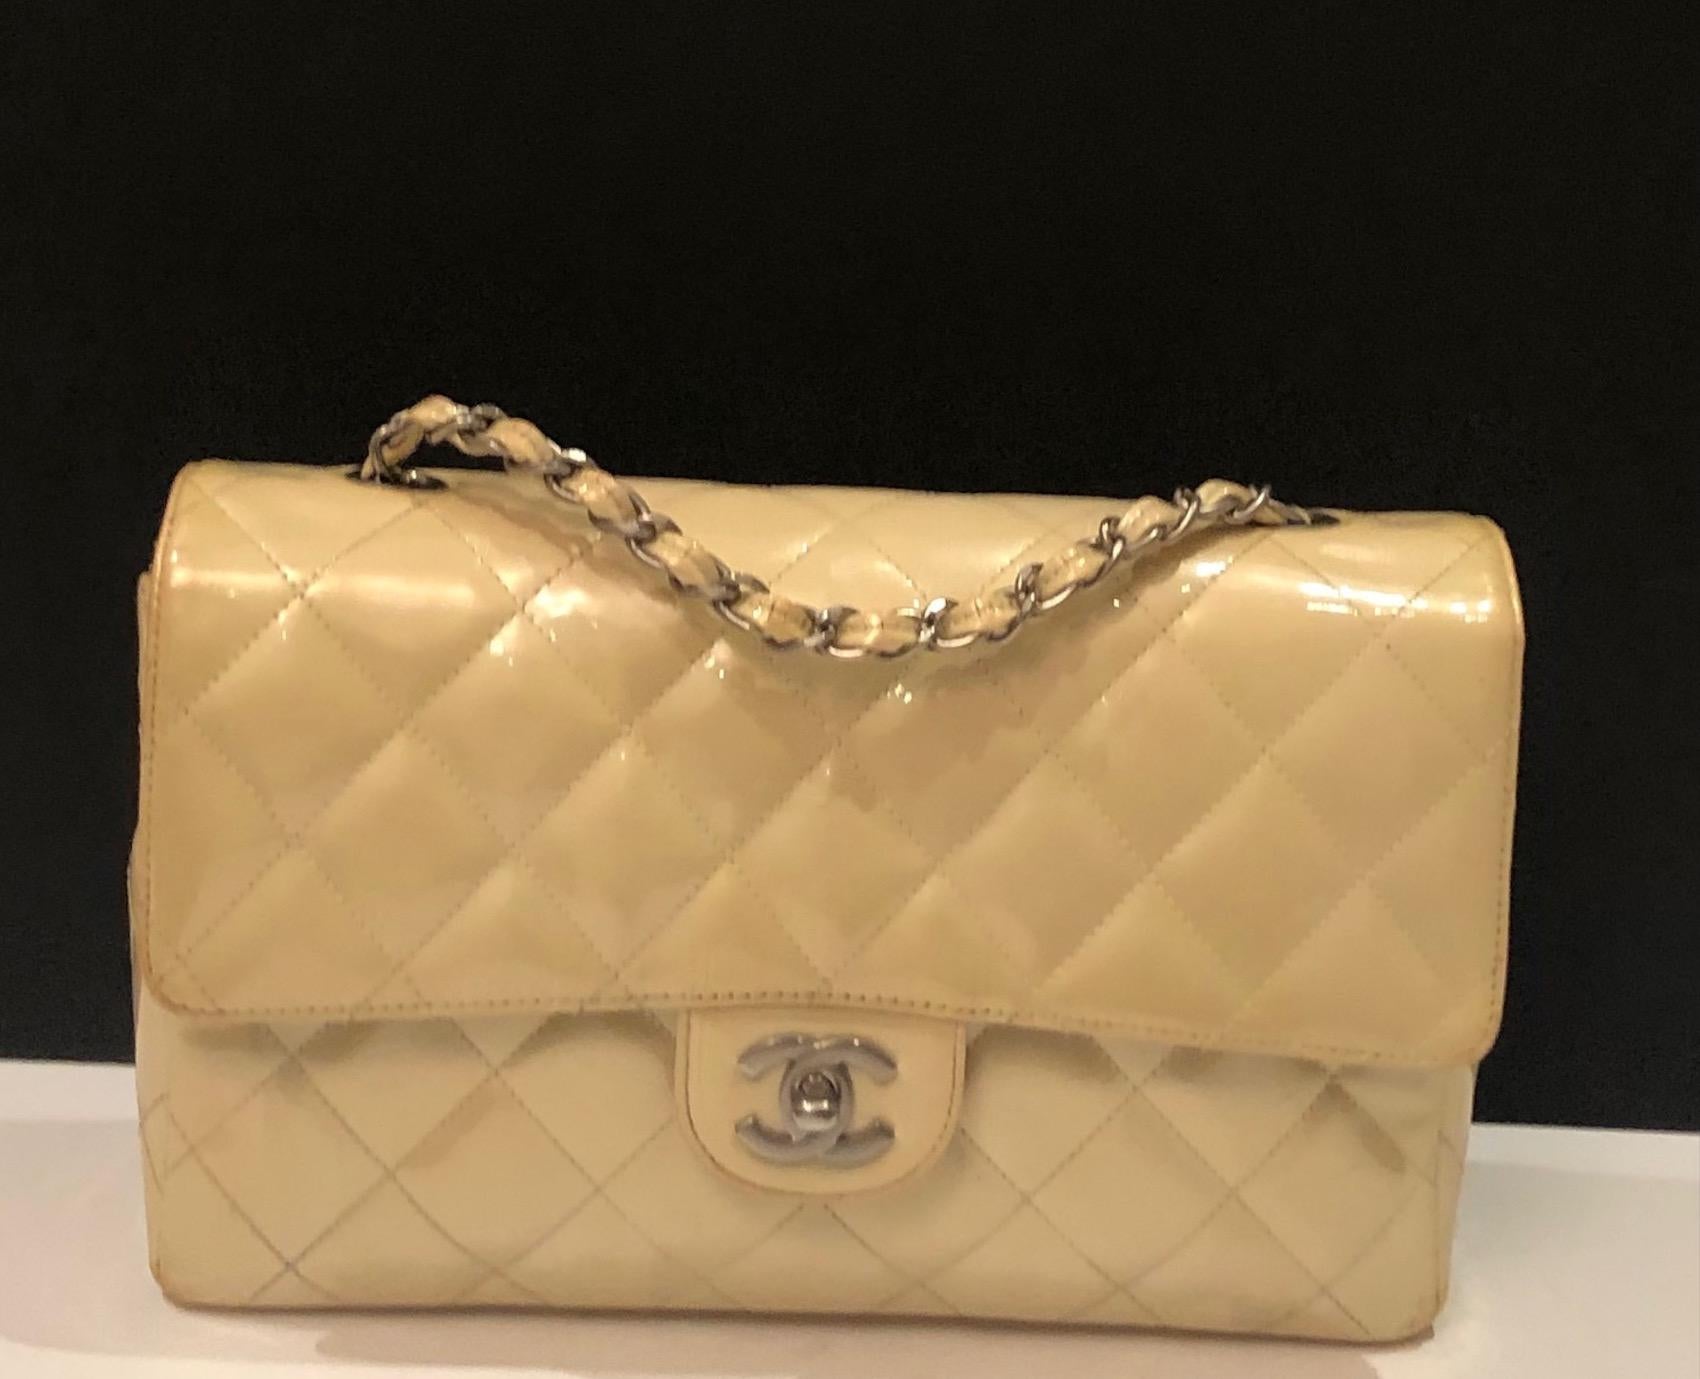 Beige CHANEL Timeless 2.55 Flap Bag Patent Leather Cream Circa 2000 For Sale